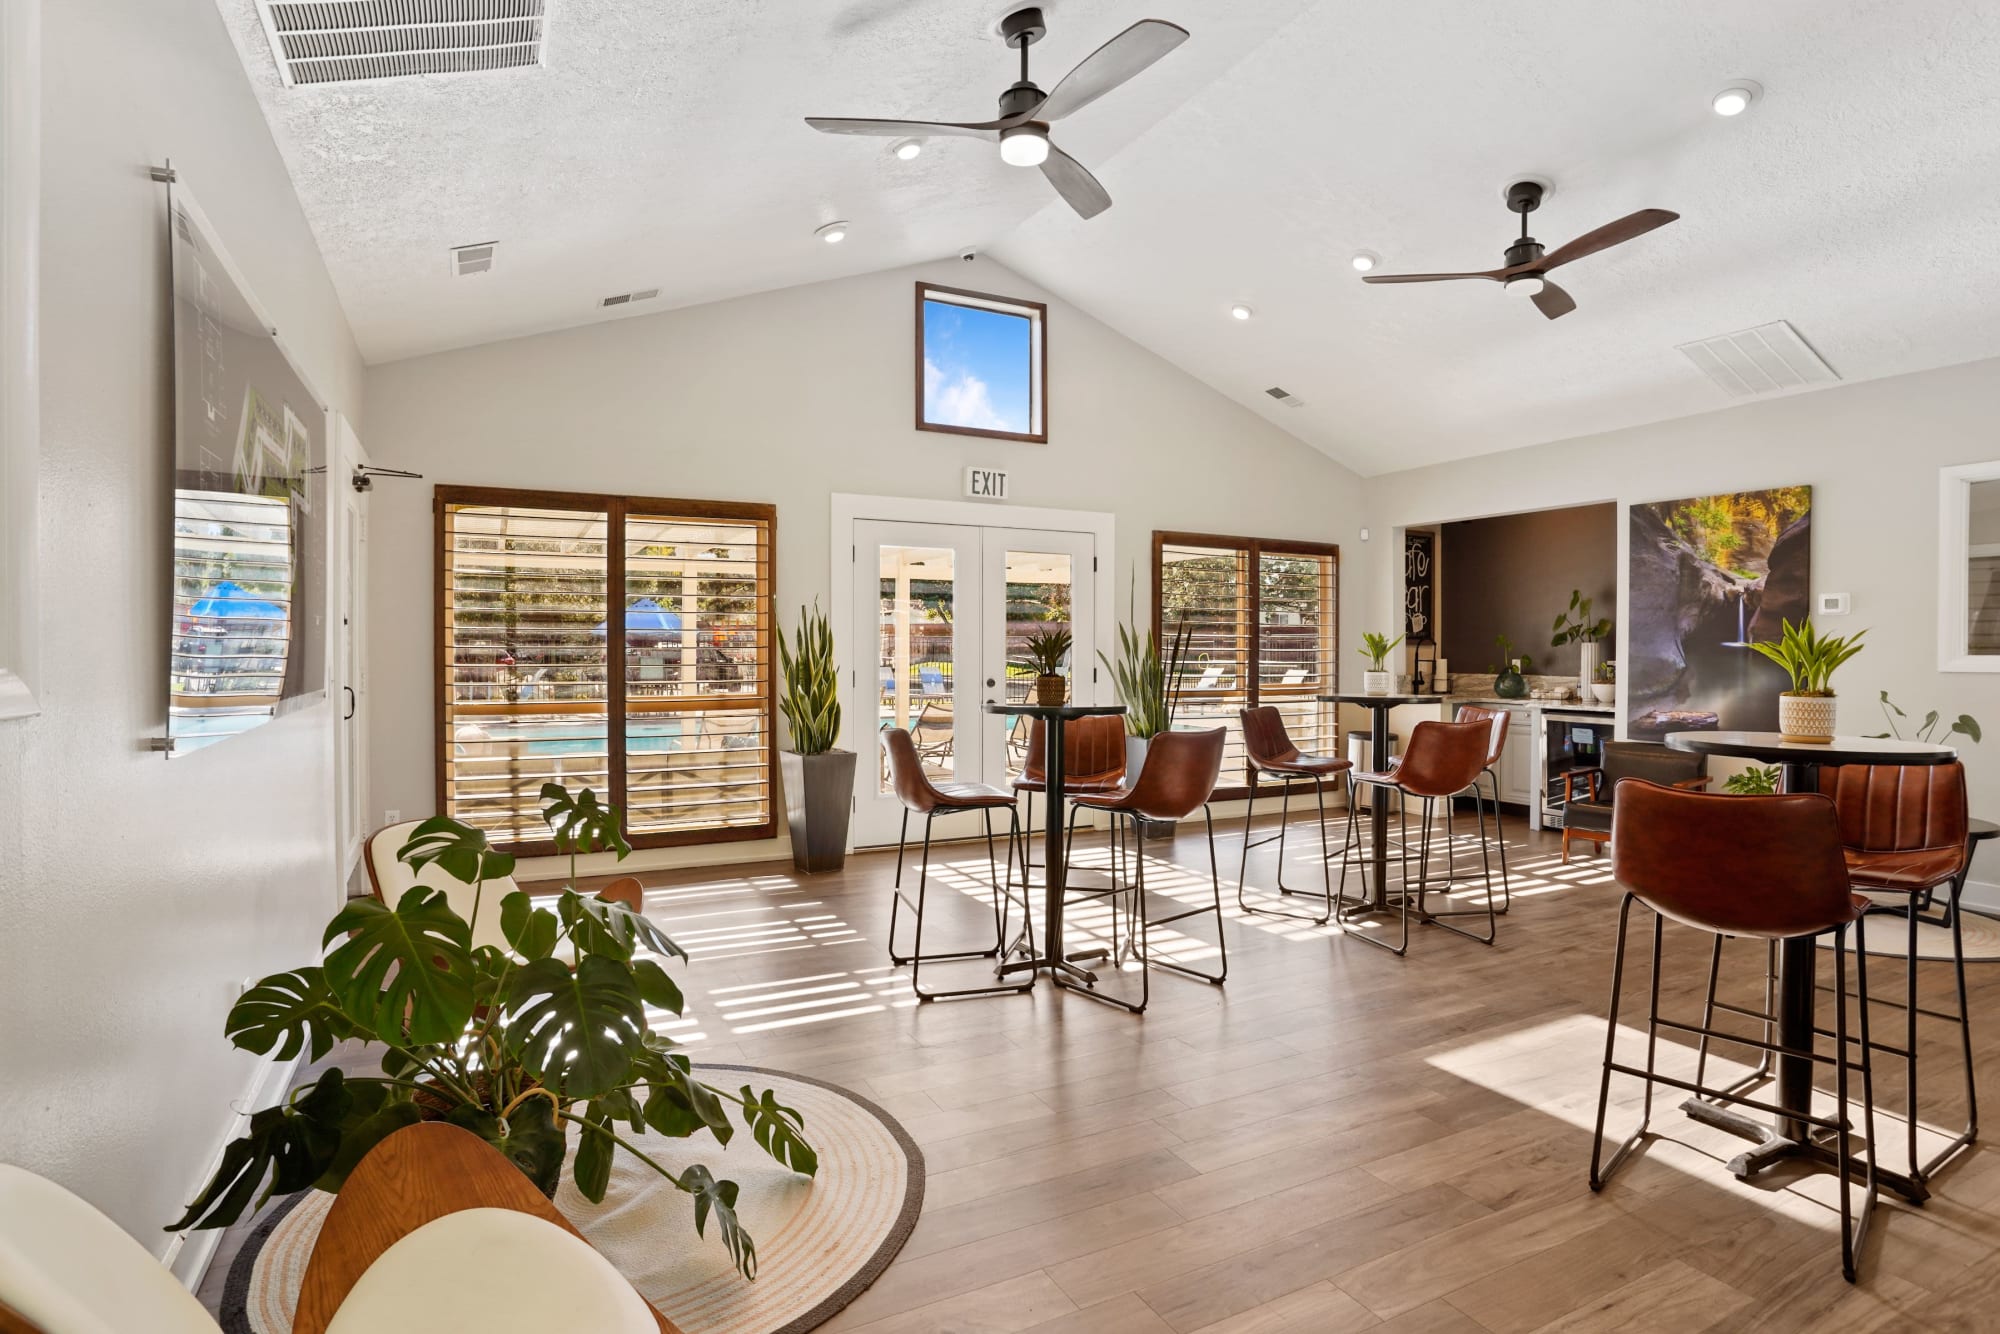 Interior clubhouse lounge area at Royal Ridge Apartments in Midvale, Utah